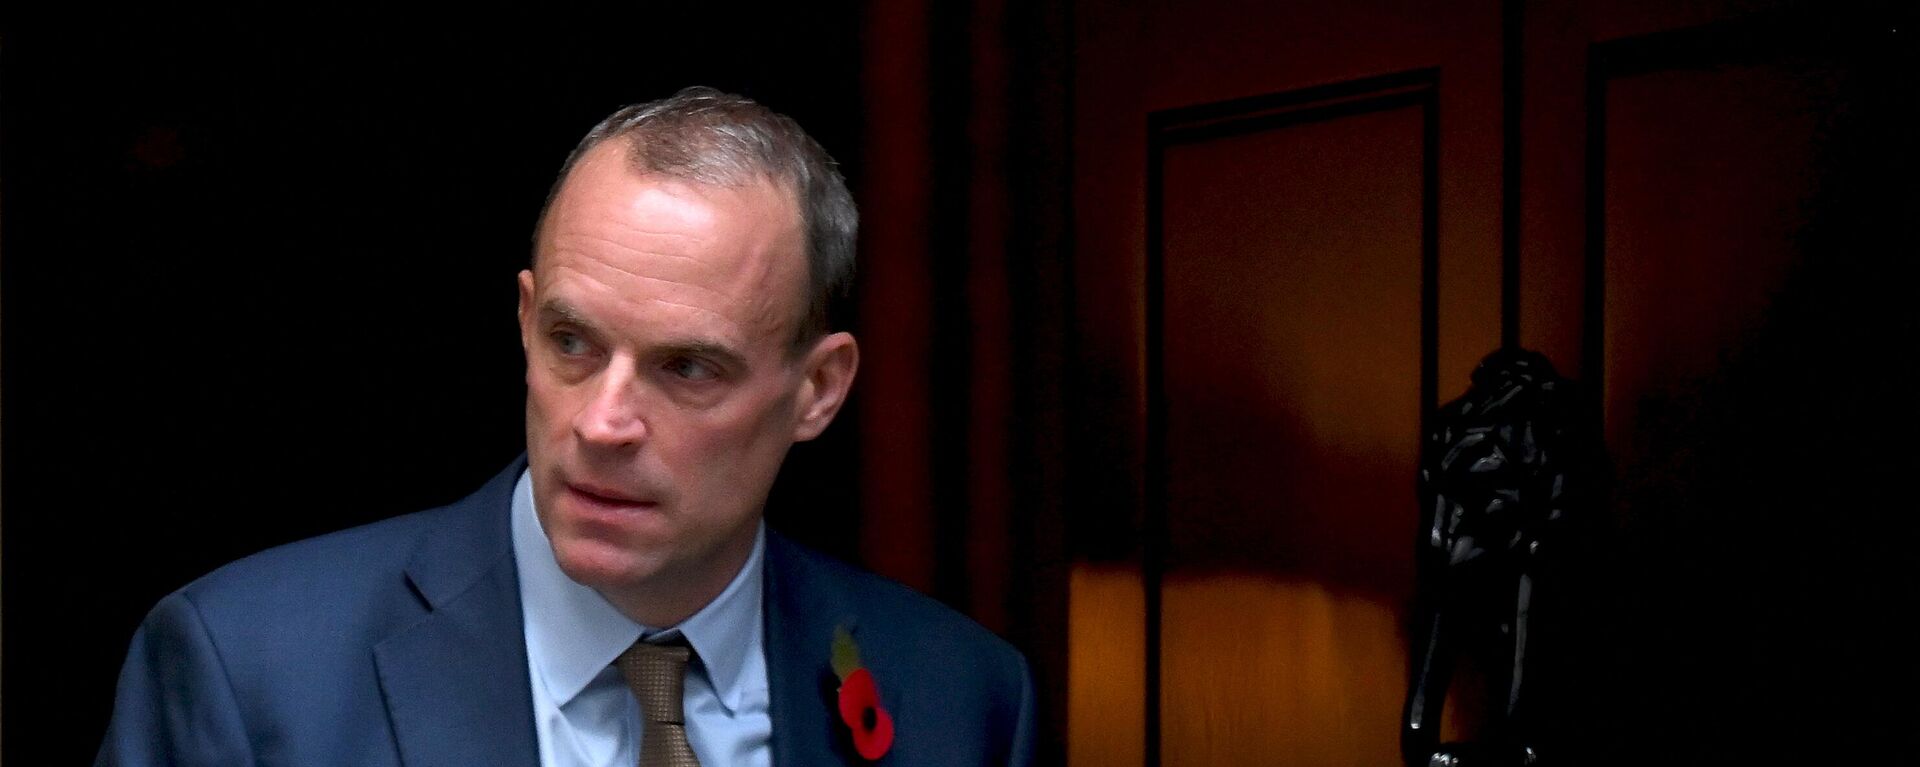 Britain's Justice Secretary and Deputy Prime Minister Dominic Raab leaves after attending a Cabinet meeting at 10 Downing Street in central London on November 1, 2022 - Sputnik International, 1920, 14.12.2022